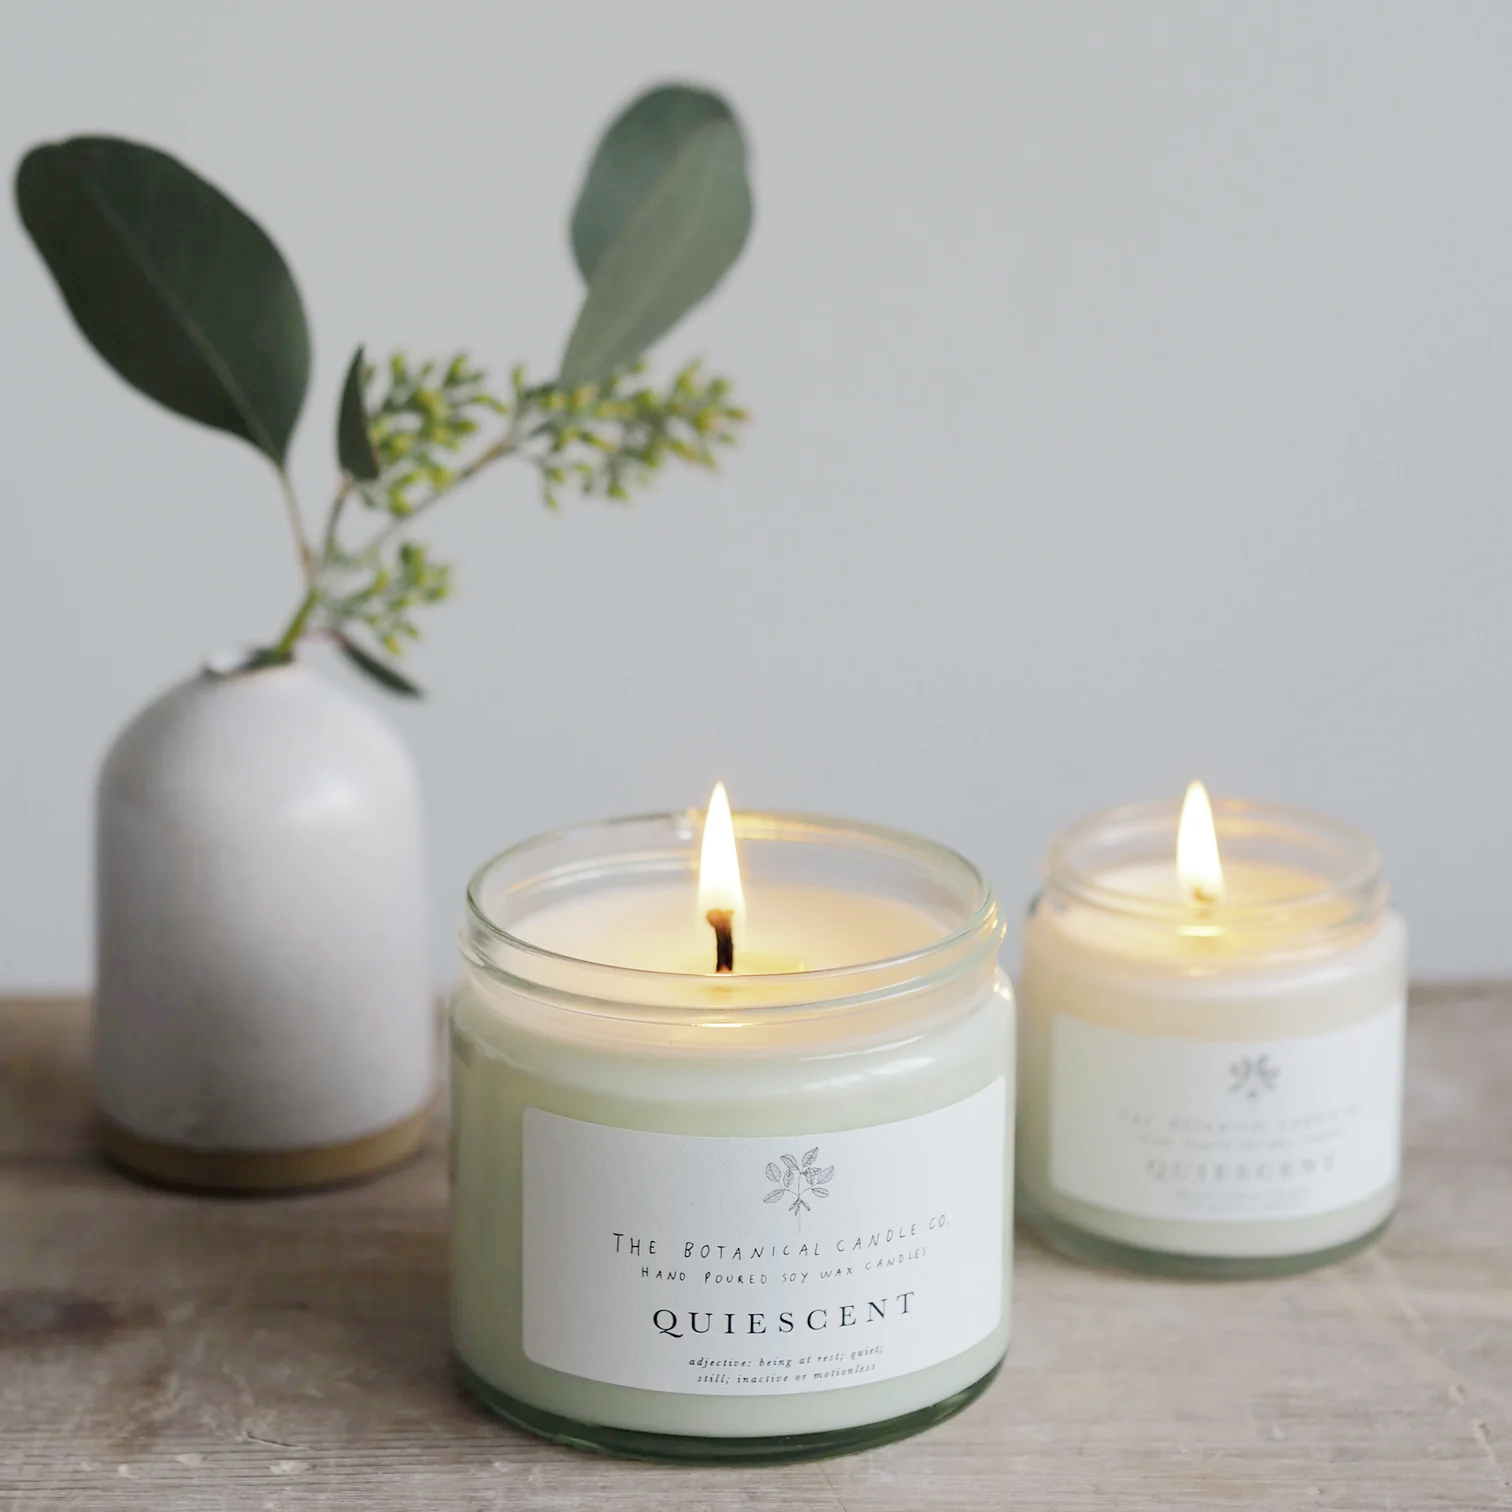 The Botanical Candle Co. Quiescent Candle - Assorted